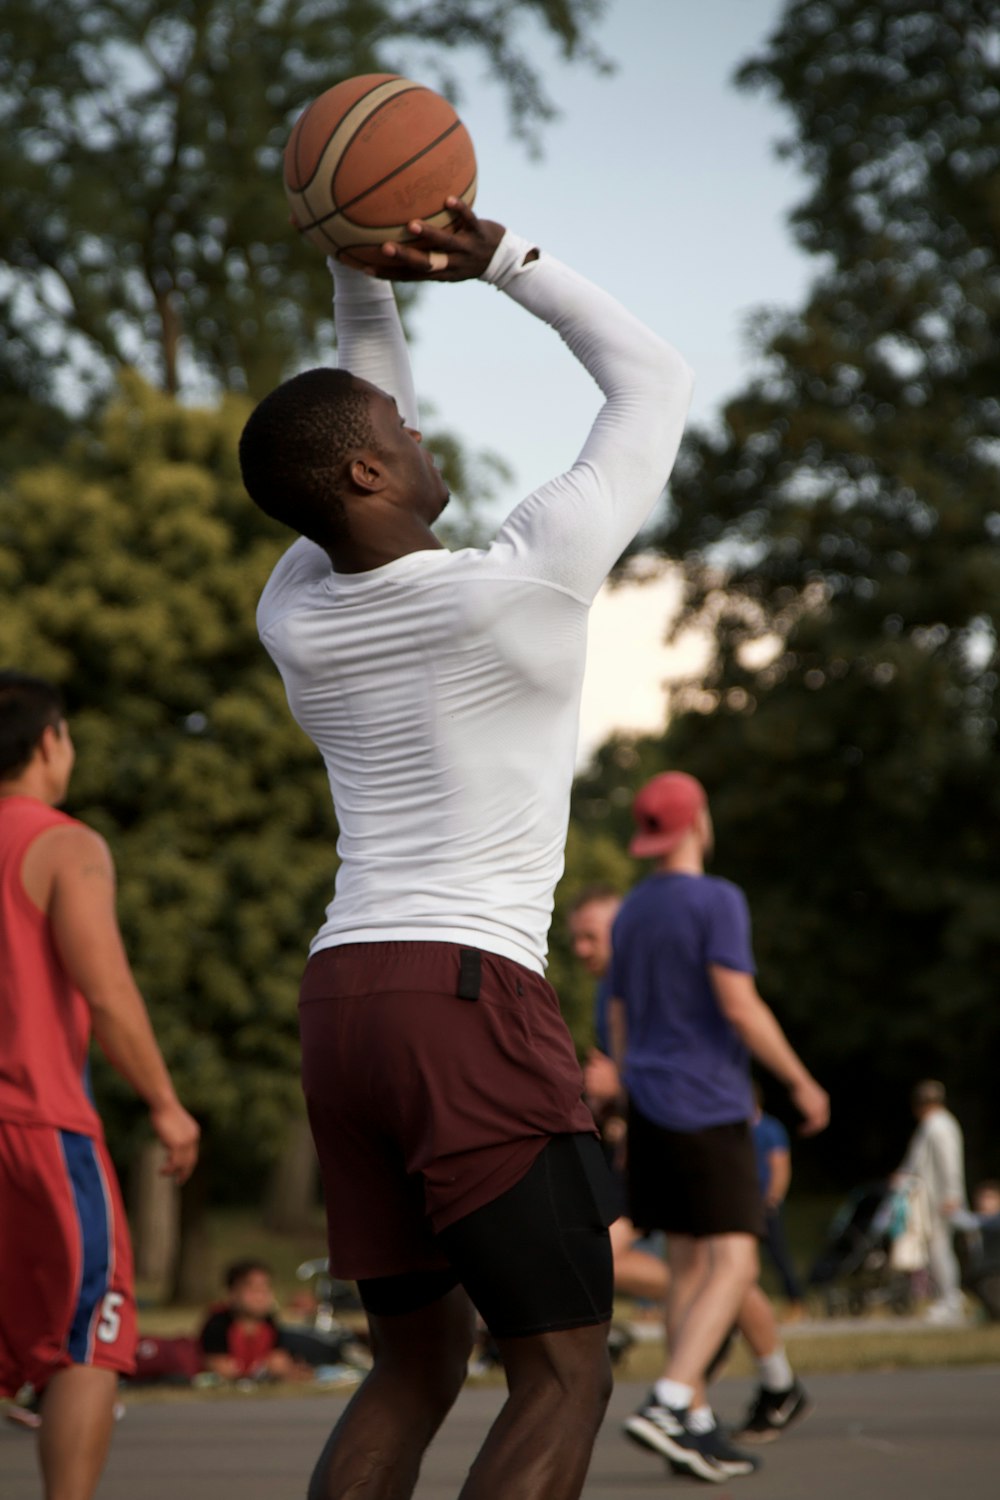 man in white long sleeve shirt and red shorts holding brown ball